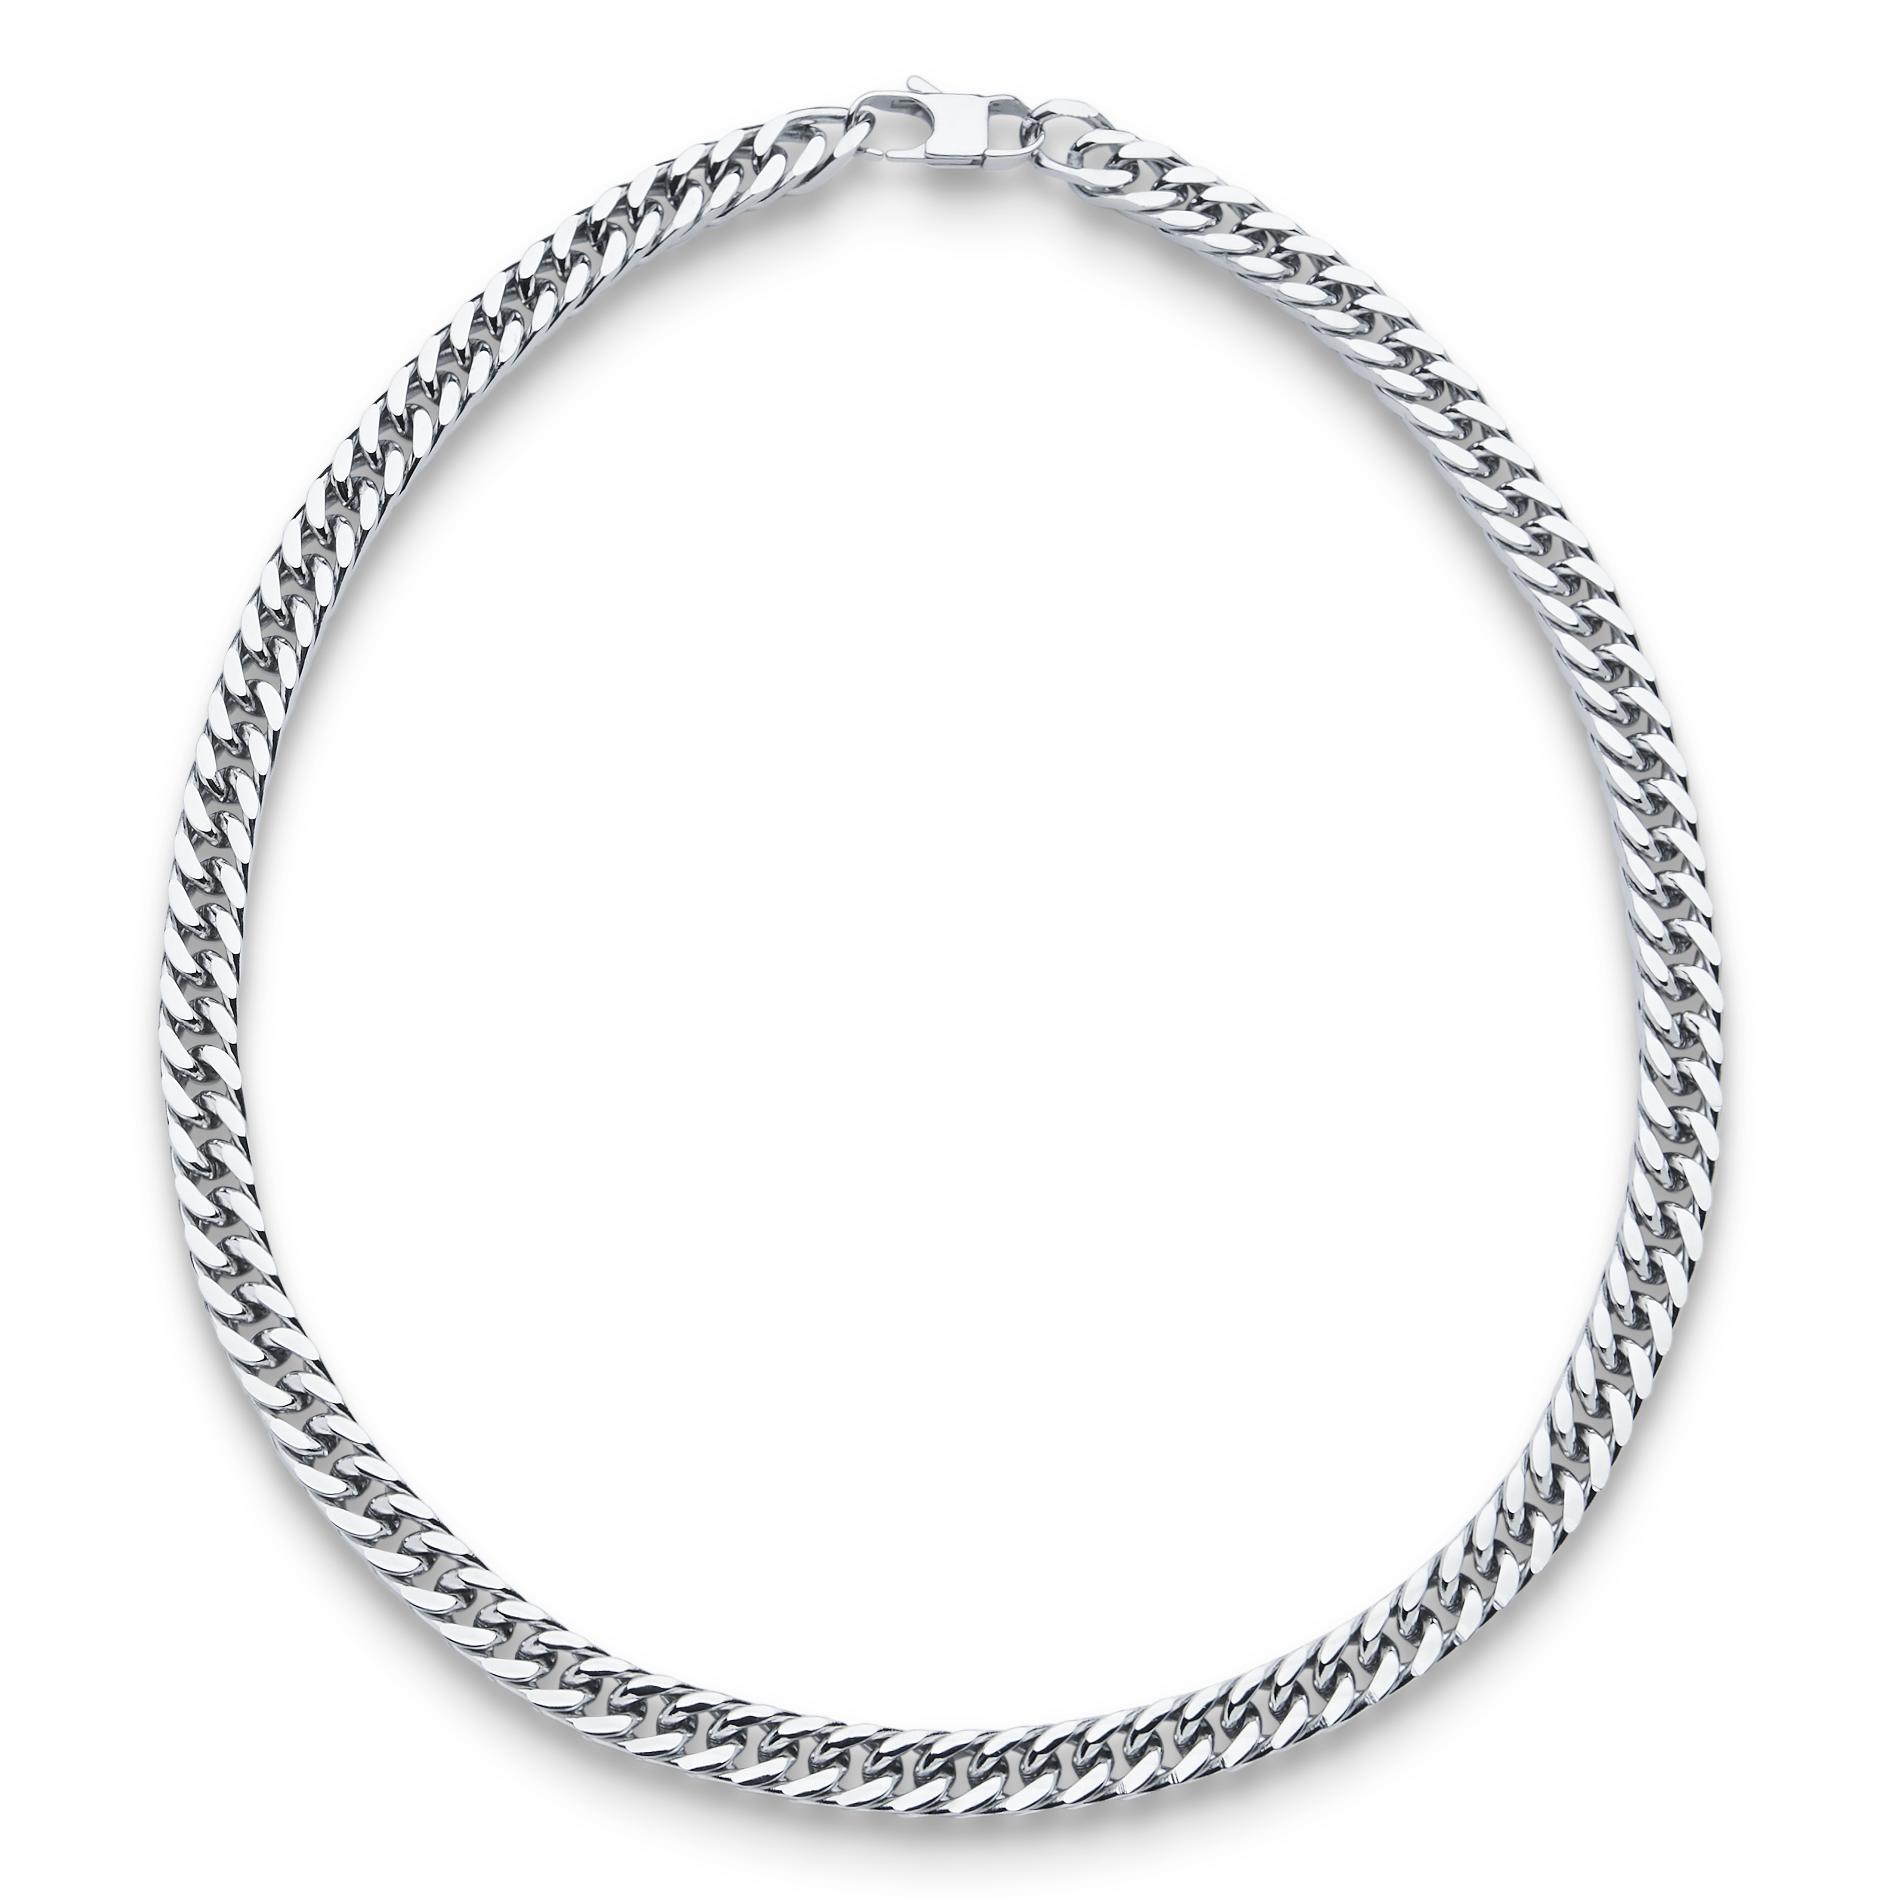 Men's Stainless Steel 24-Inch Curb Chain Necklace 24 Inch Stainless Steel Necklace